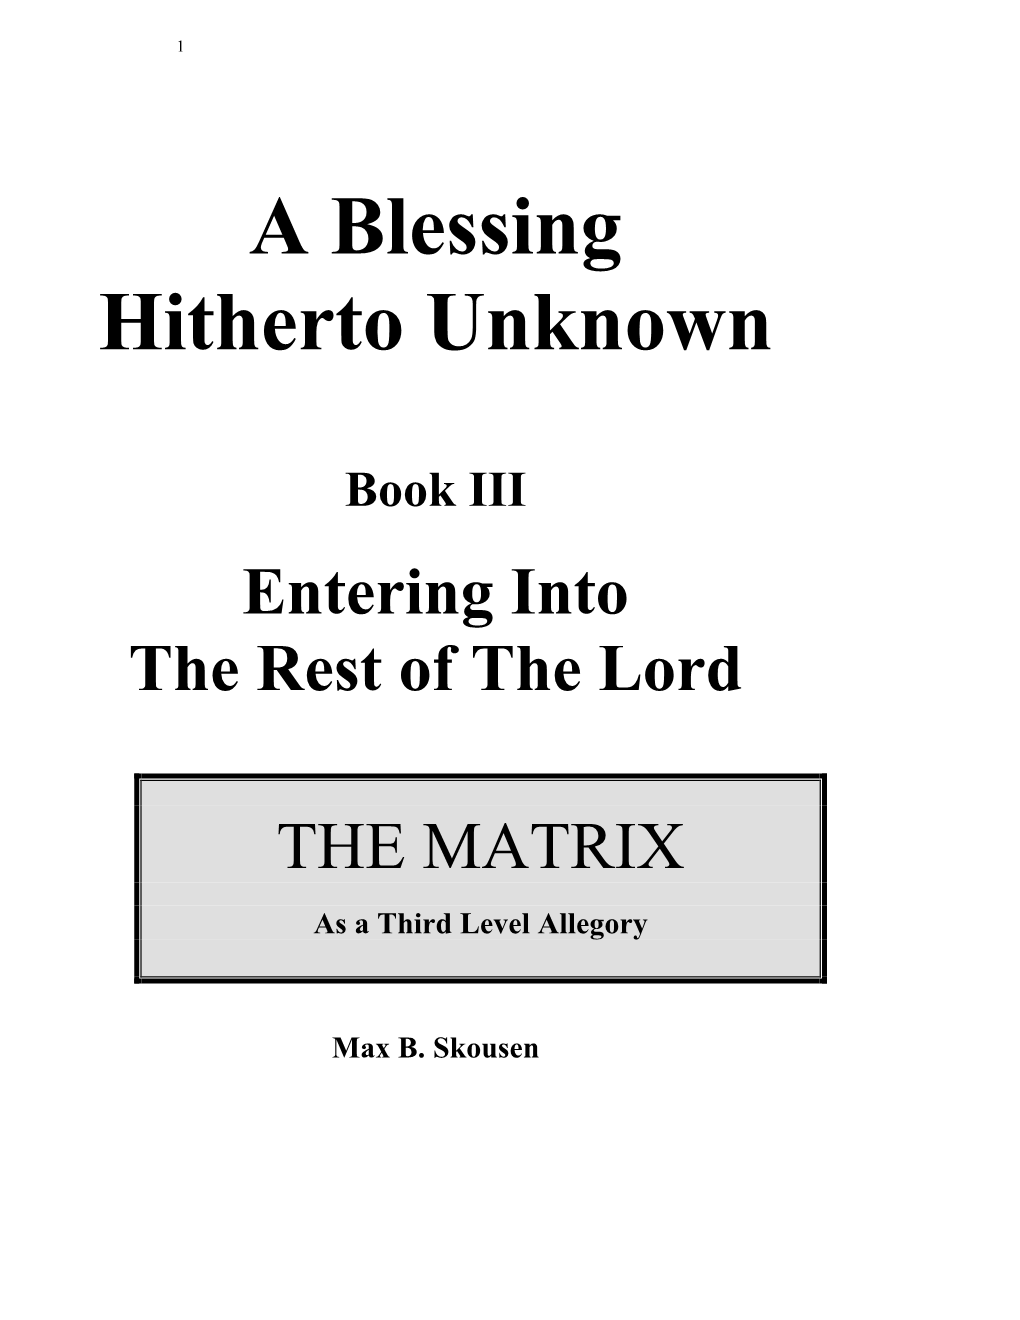 A Blessing Hitherto Unknown